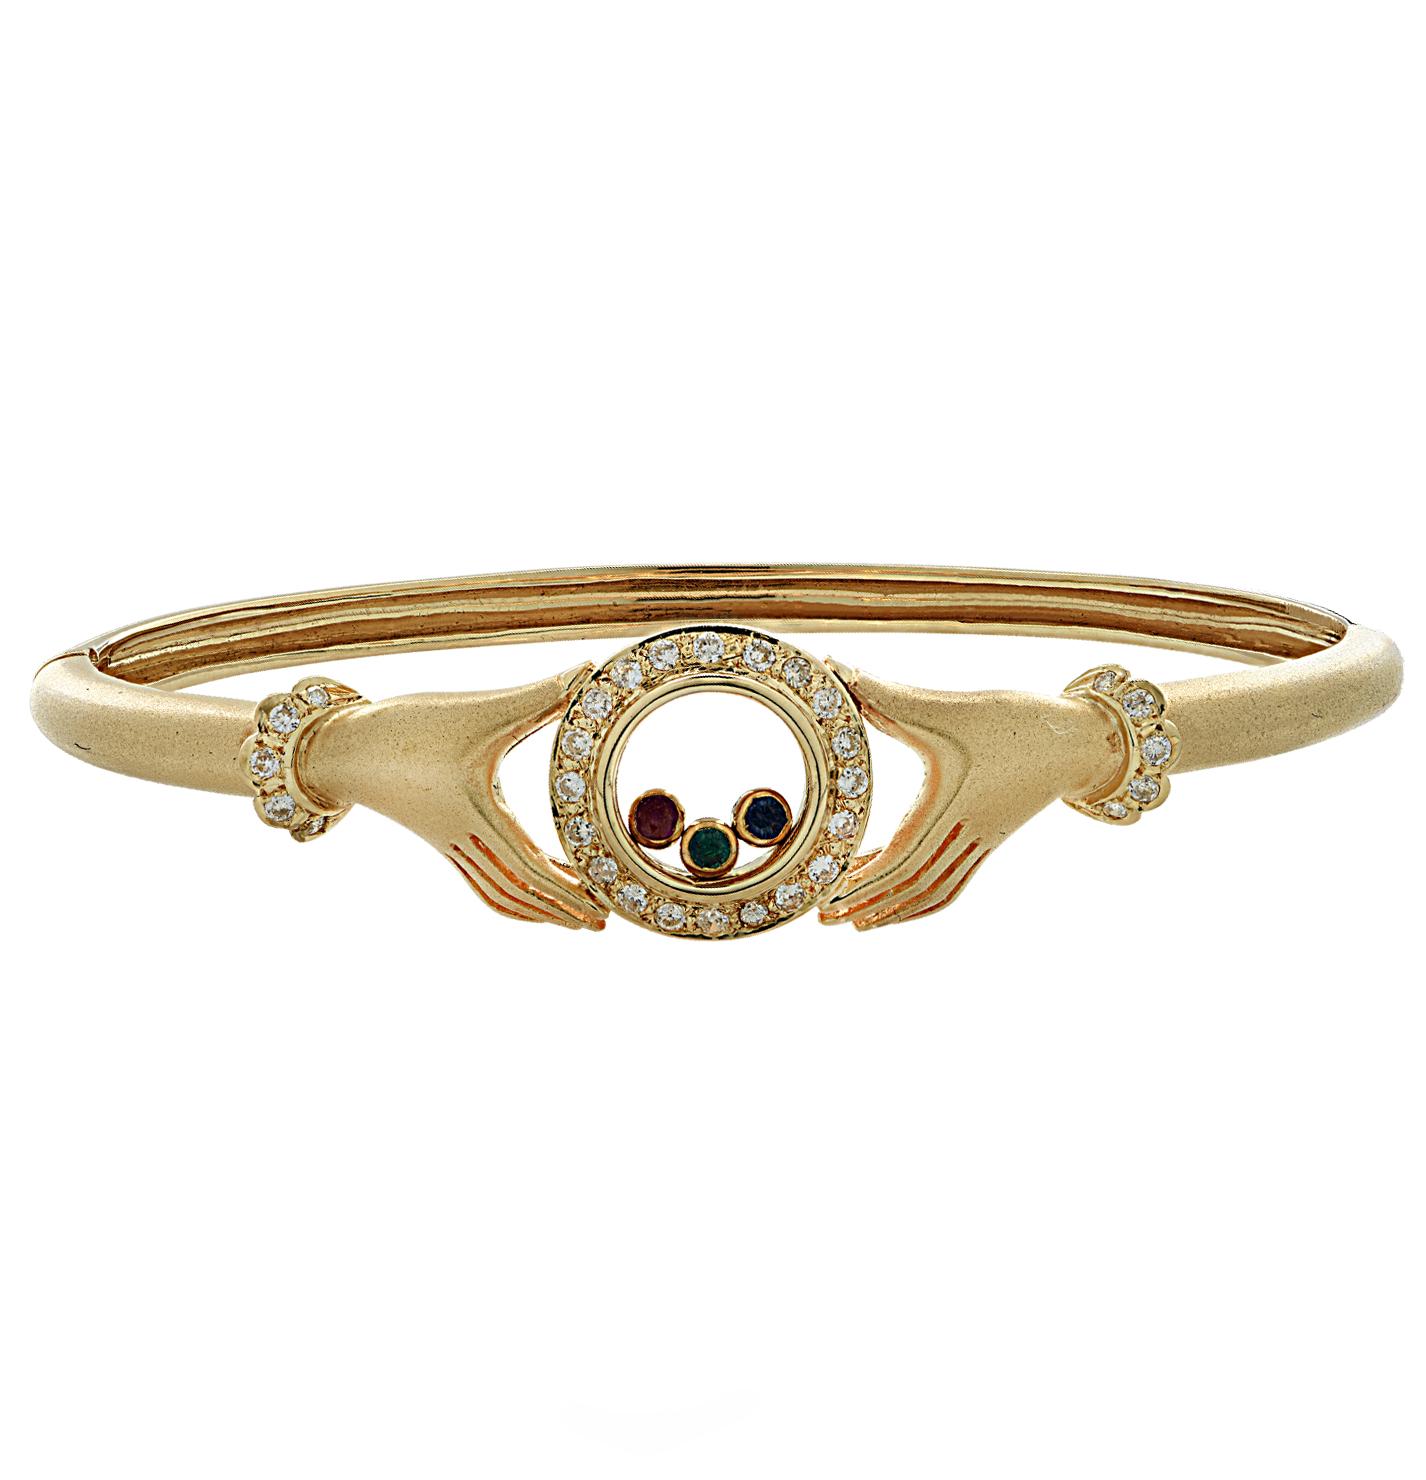 Gorgeous bangle bracelet crafted in 18 karat yellow gold, featuring 30 round brilliant cut diamonds weighing approximately .40 carats total, G color, VS-SI clarity and one emerald, one sapphire and one ruby weighing approximately .0.09 carats total.